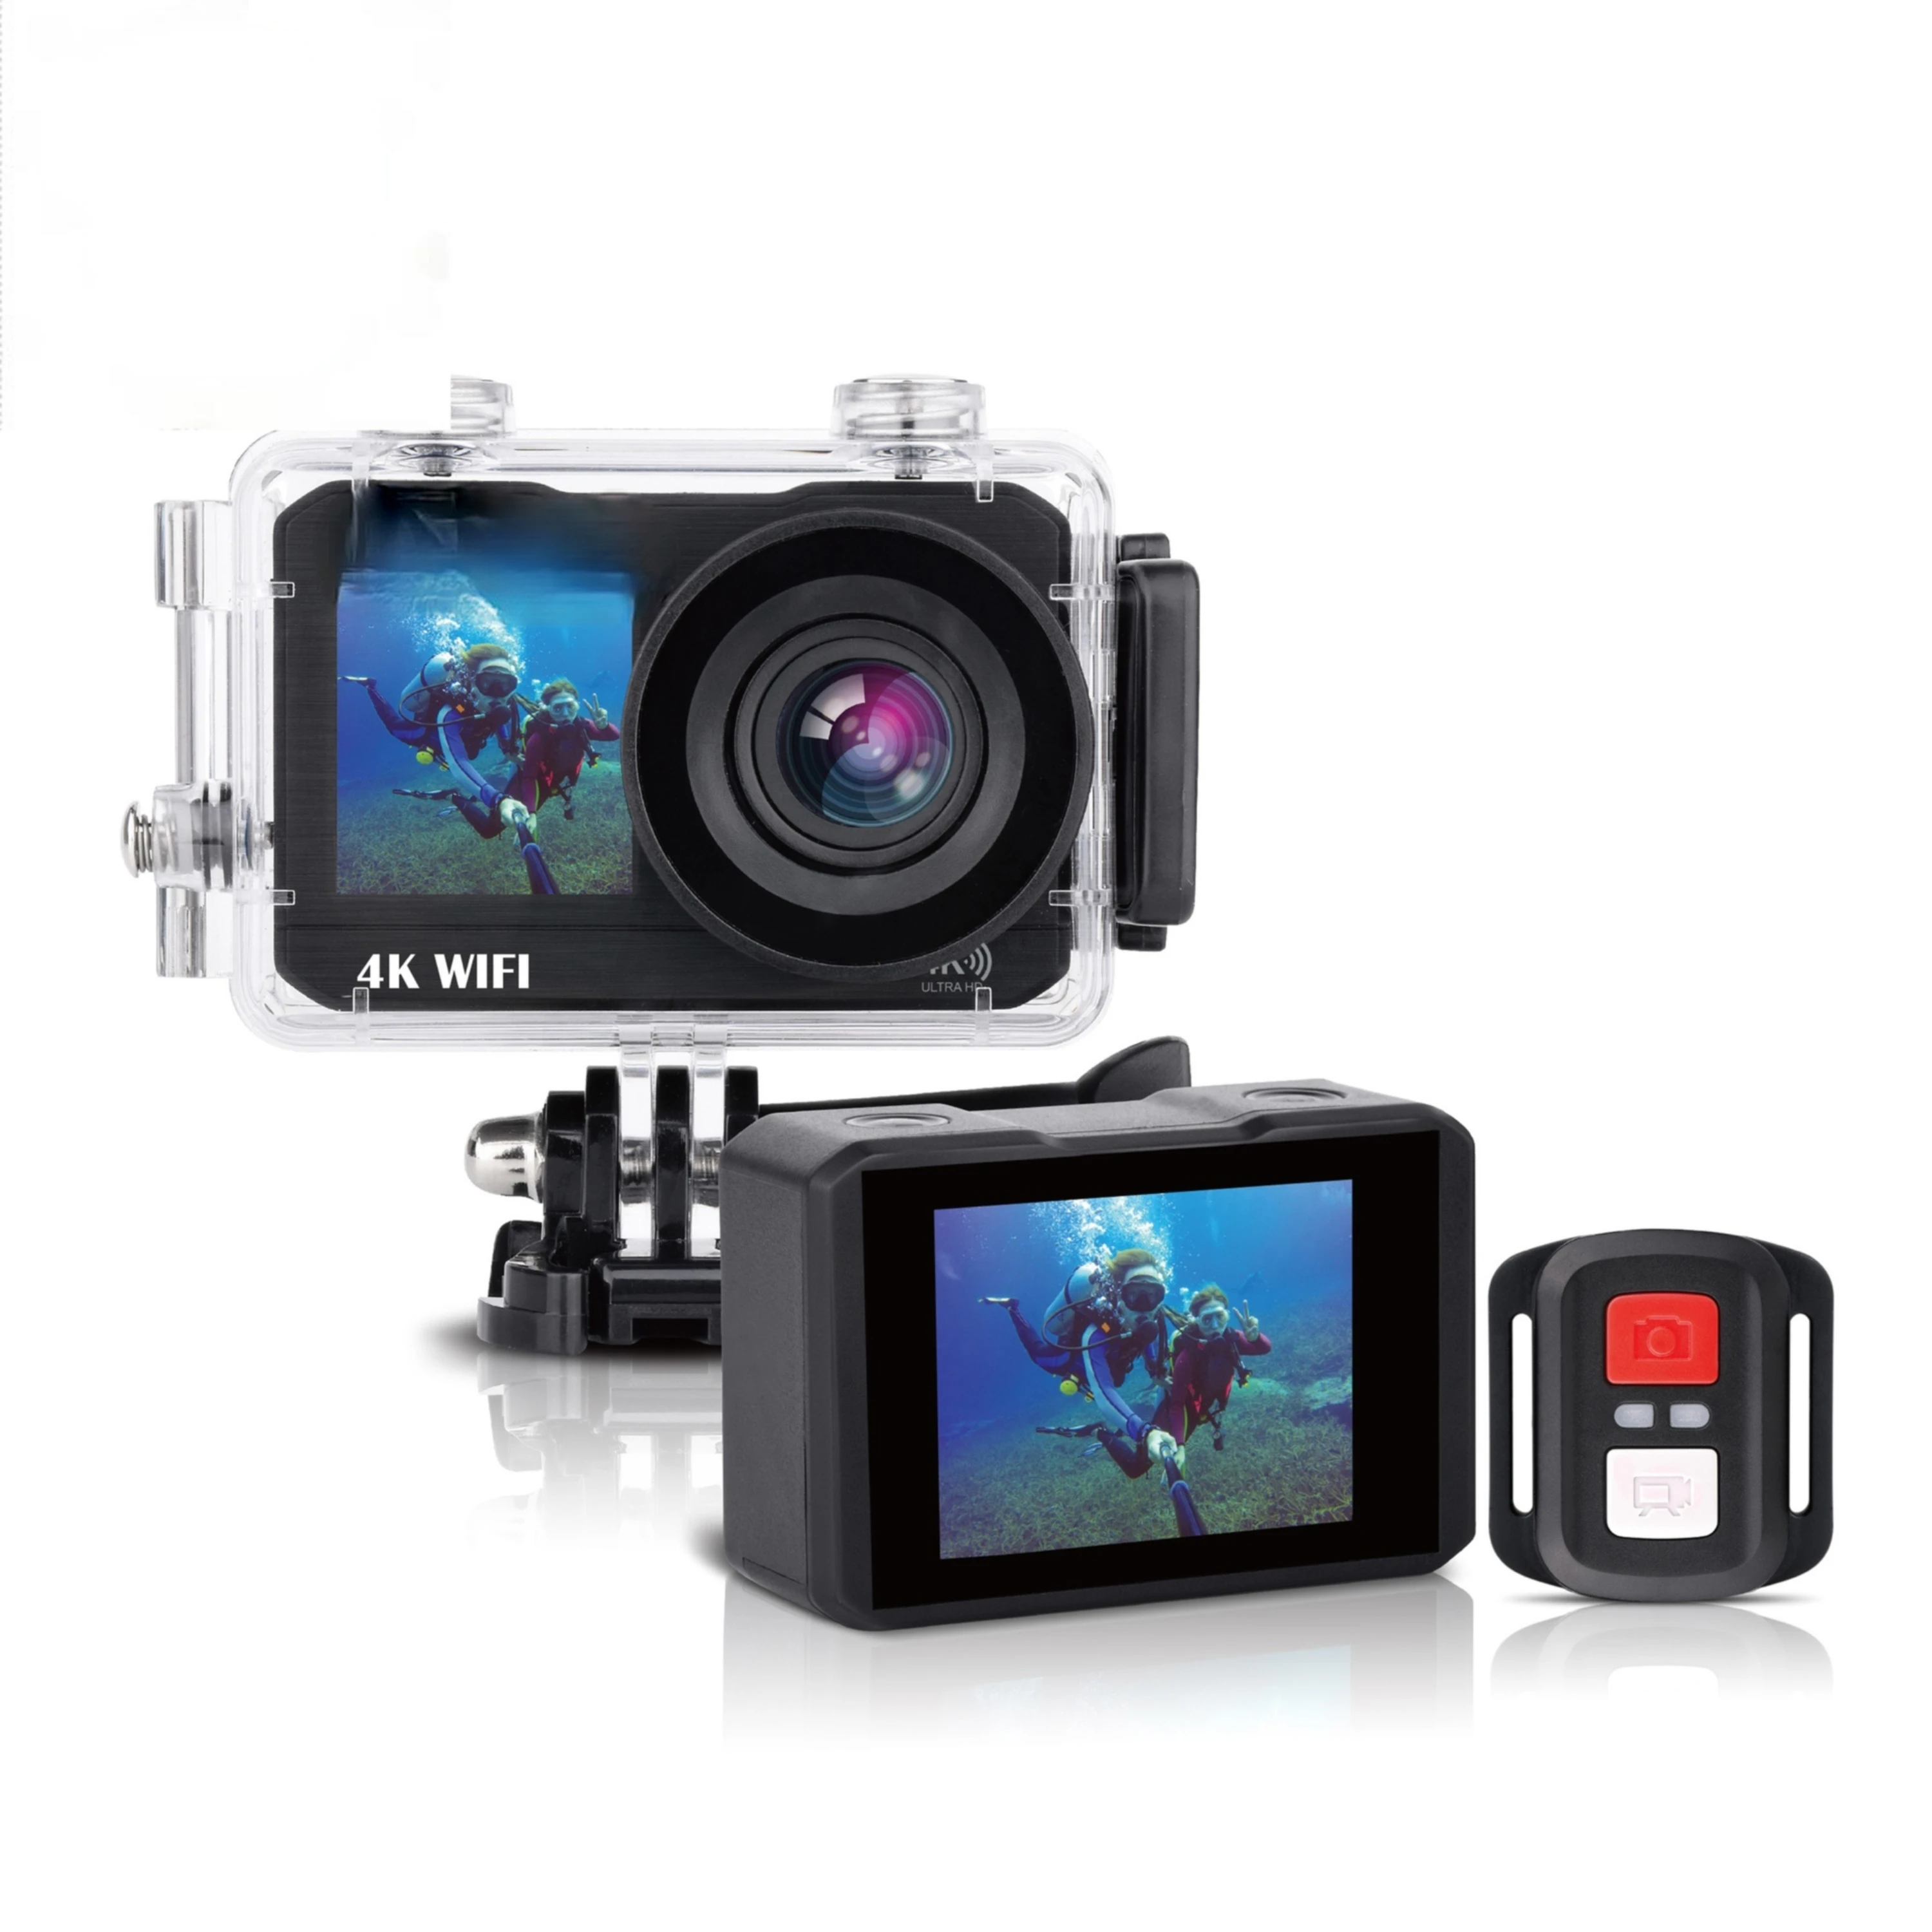 4k wifi action camera dual screens  action cam sports cam wholesale high quality sport camera sjcam c300 pocket 4k 30fps action camera 5g 2 4g wifi sports camera 1 33 inch touch control screens